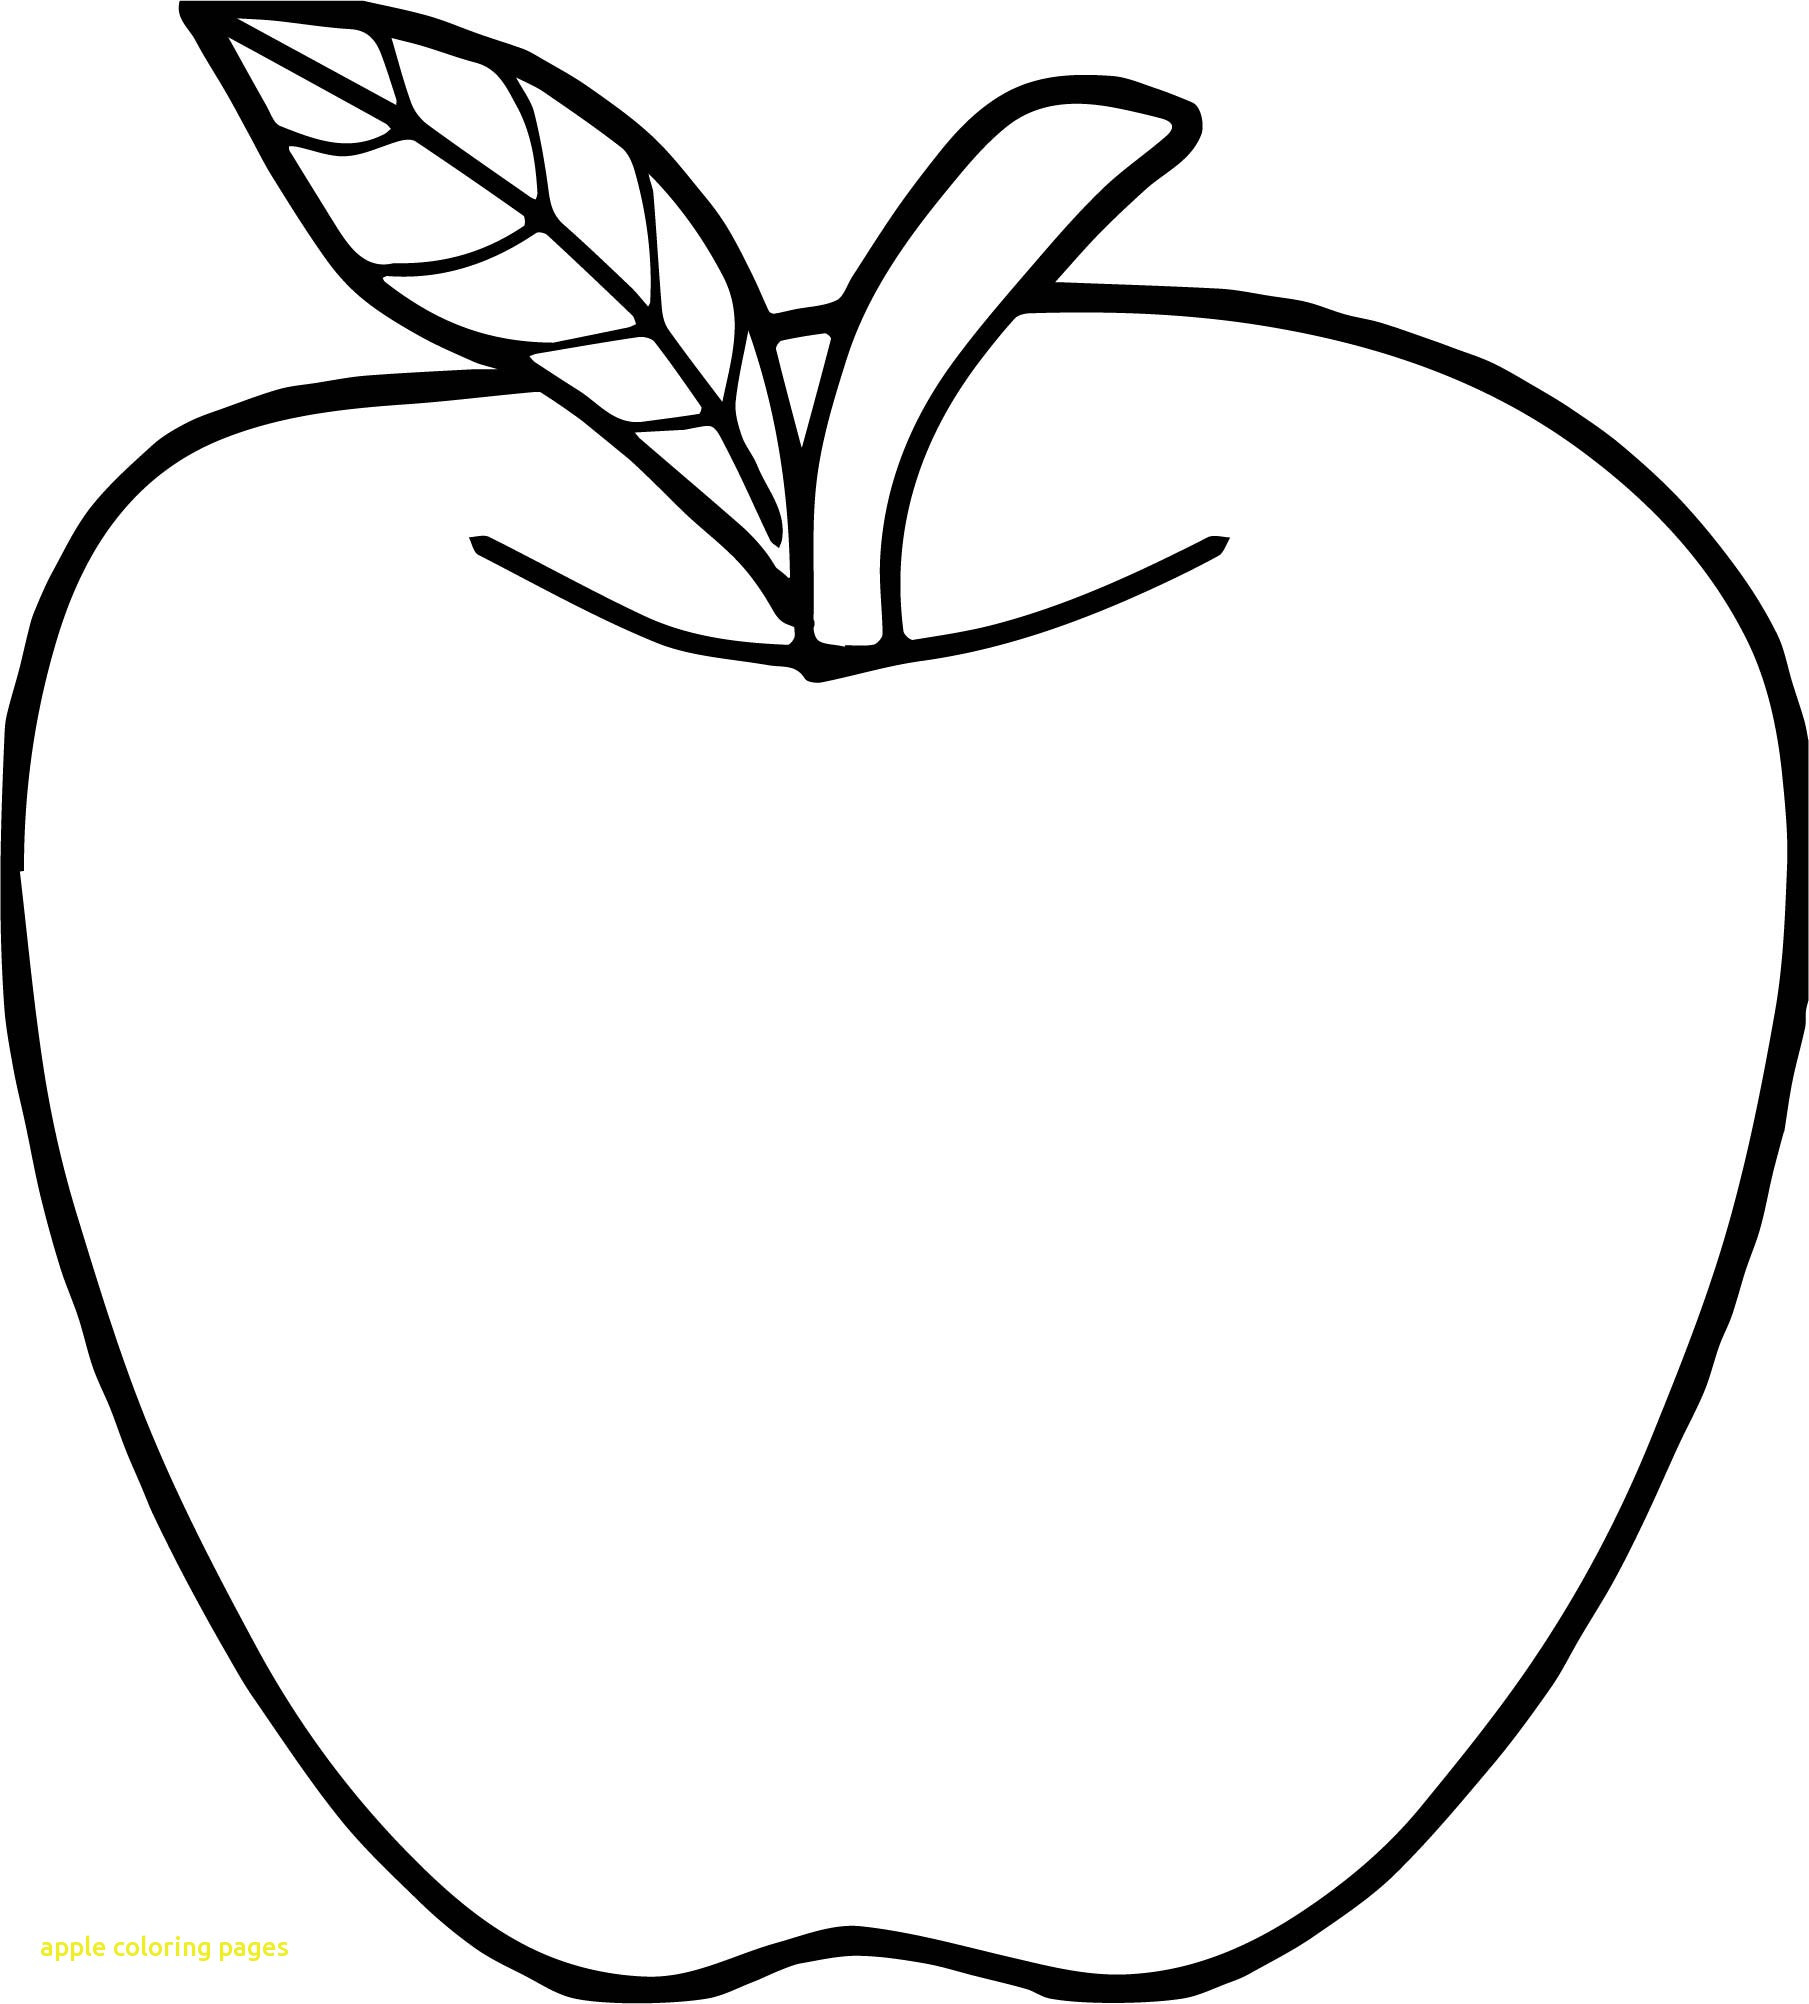 Coloring pages apple.